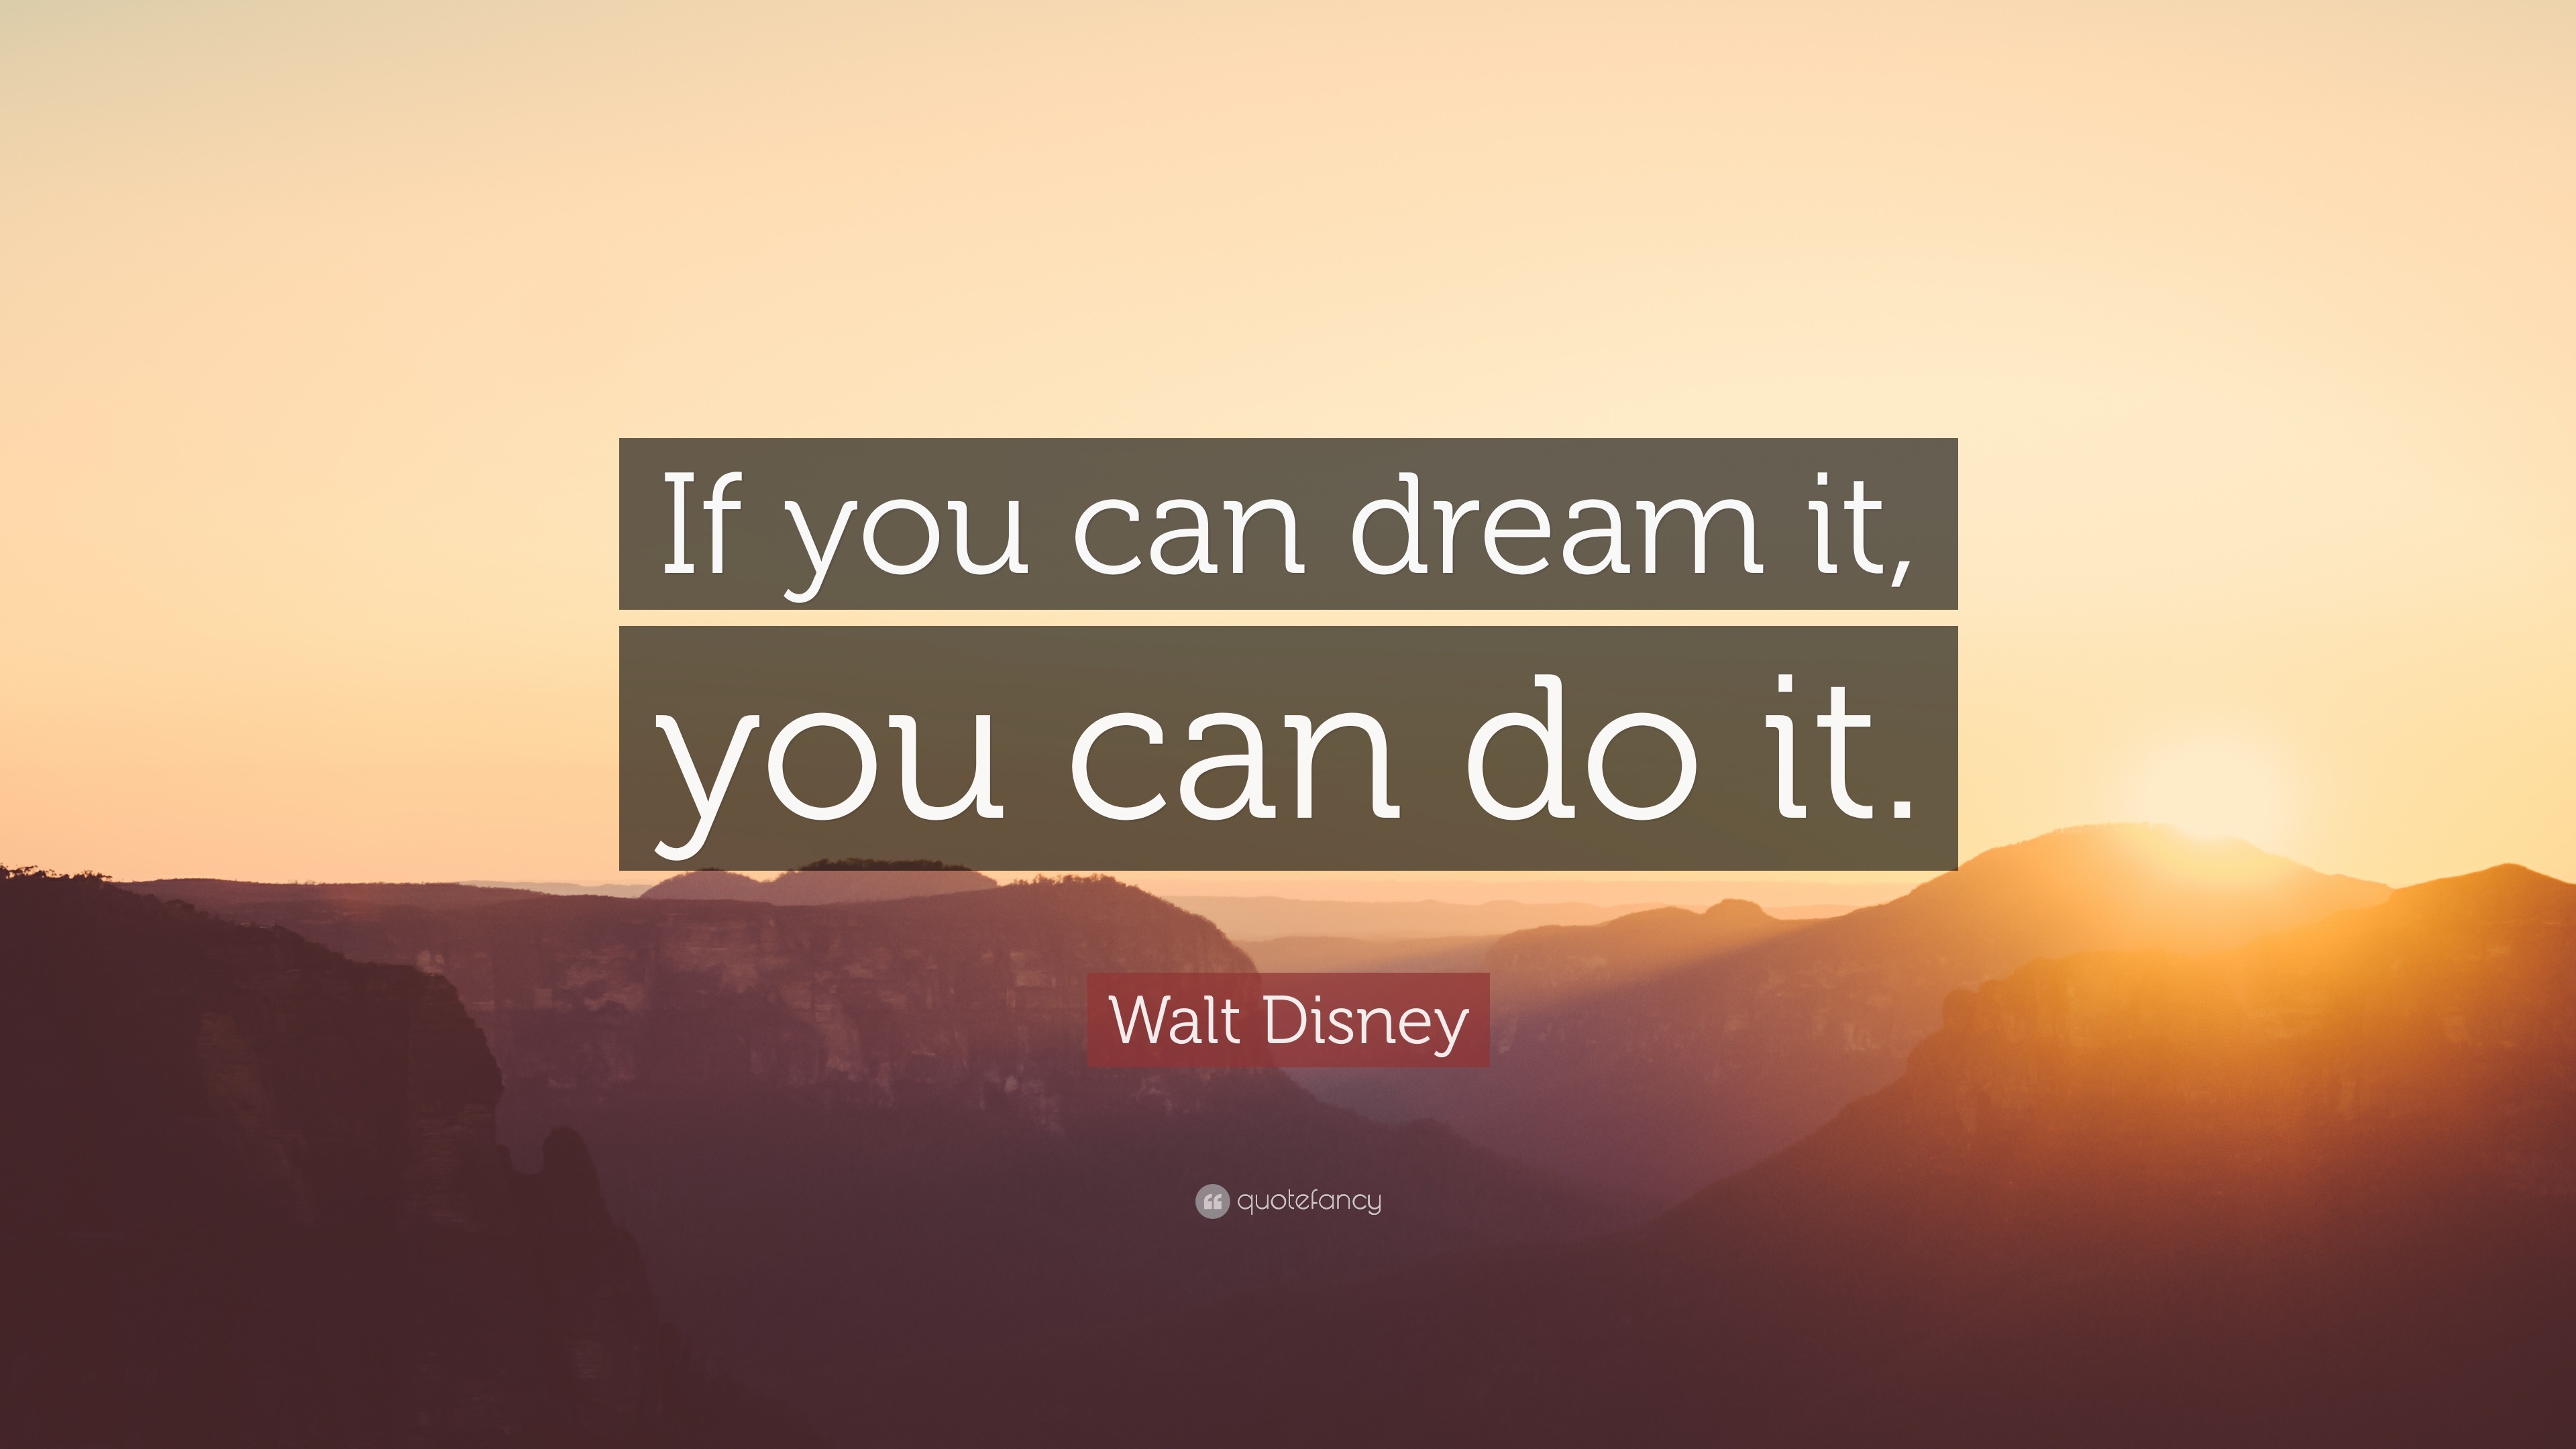 I Can Do This For Hours Walt Disney Quote: “If you can dream it, you can do it.”